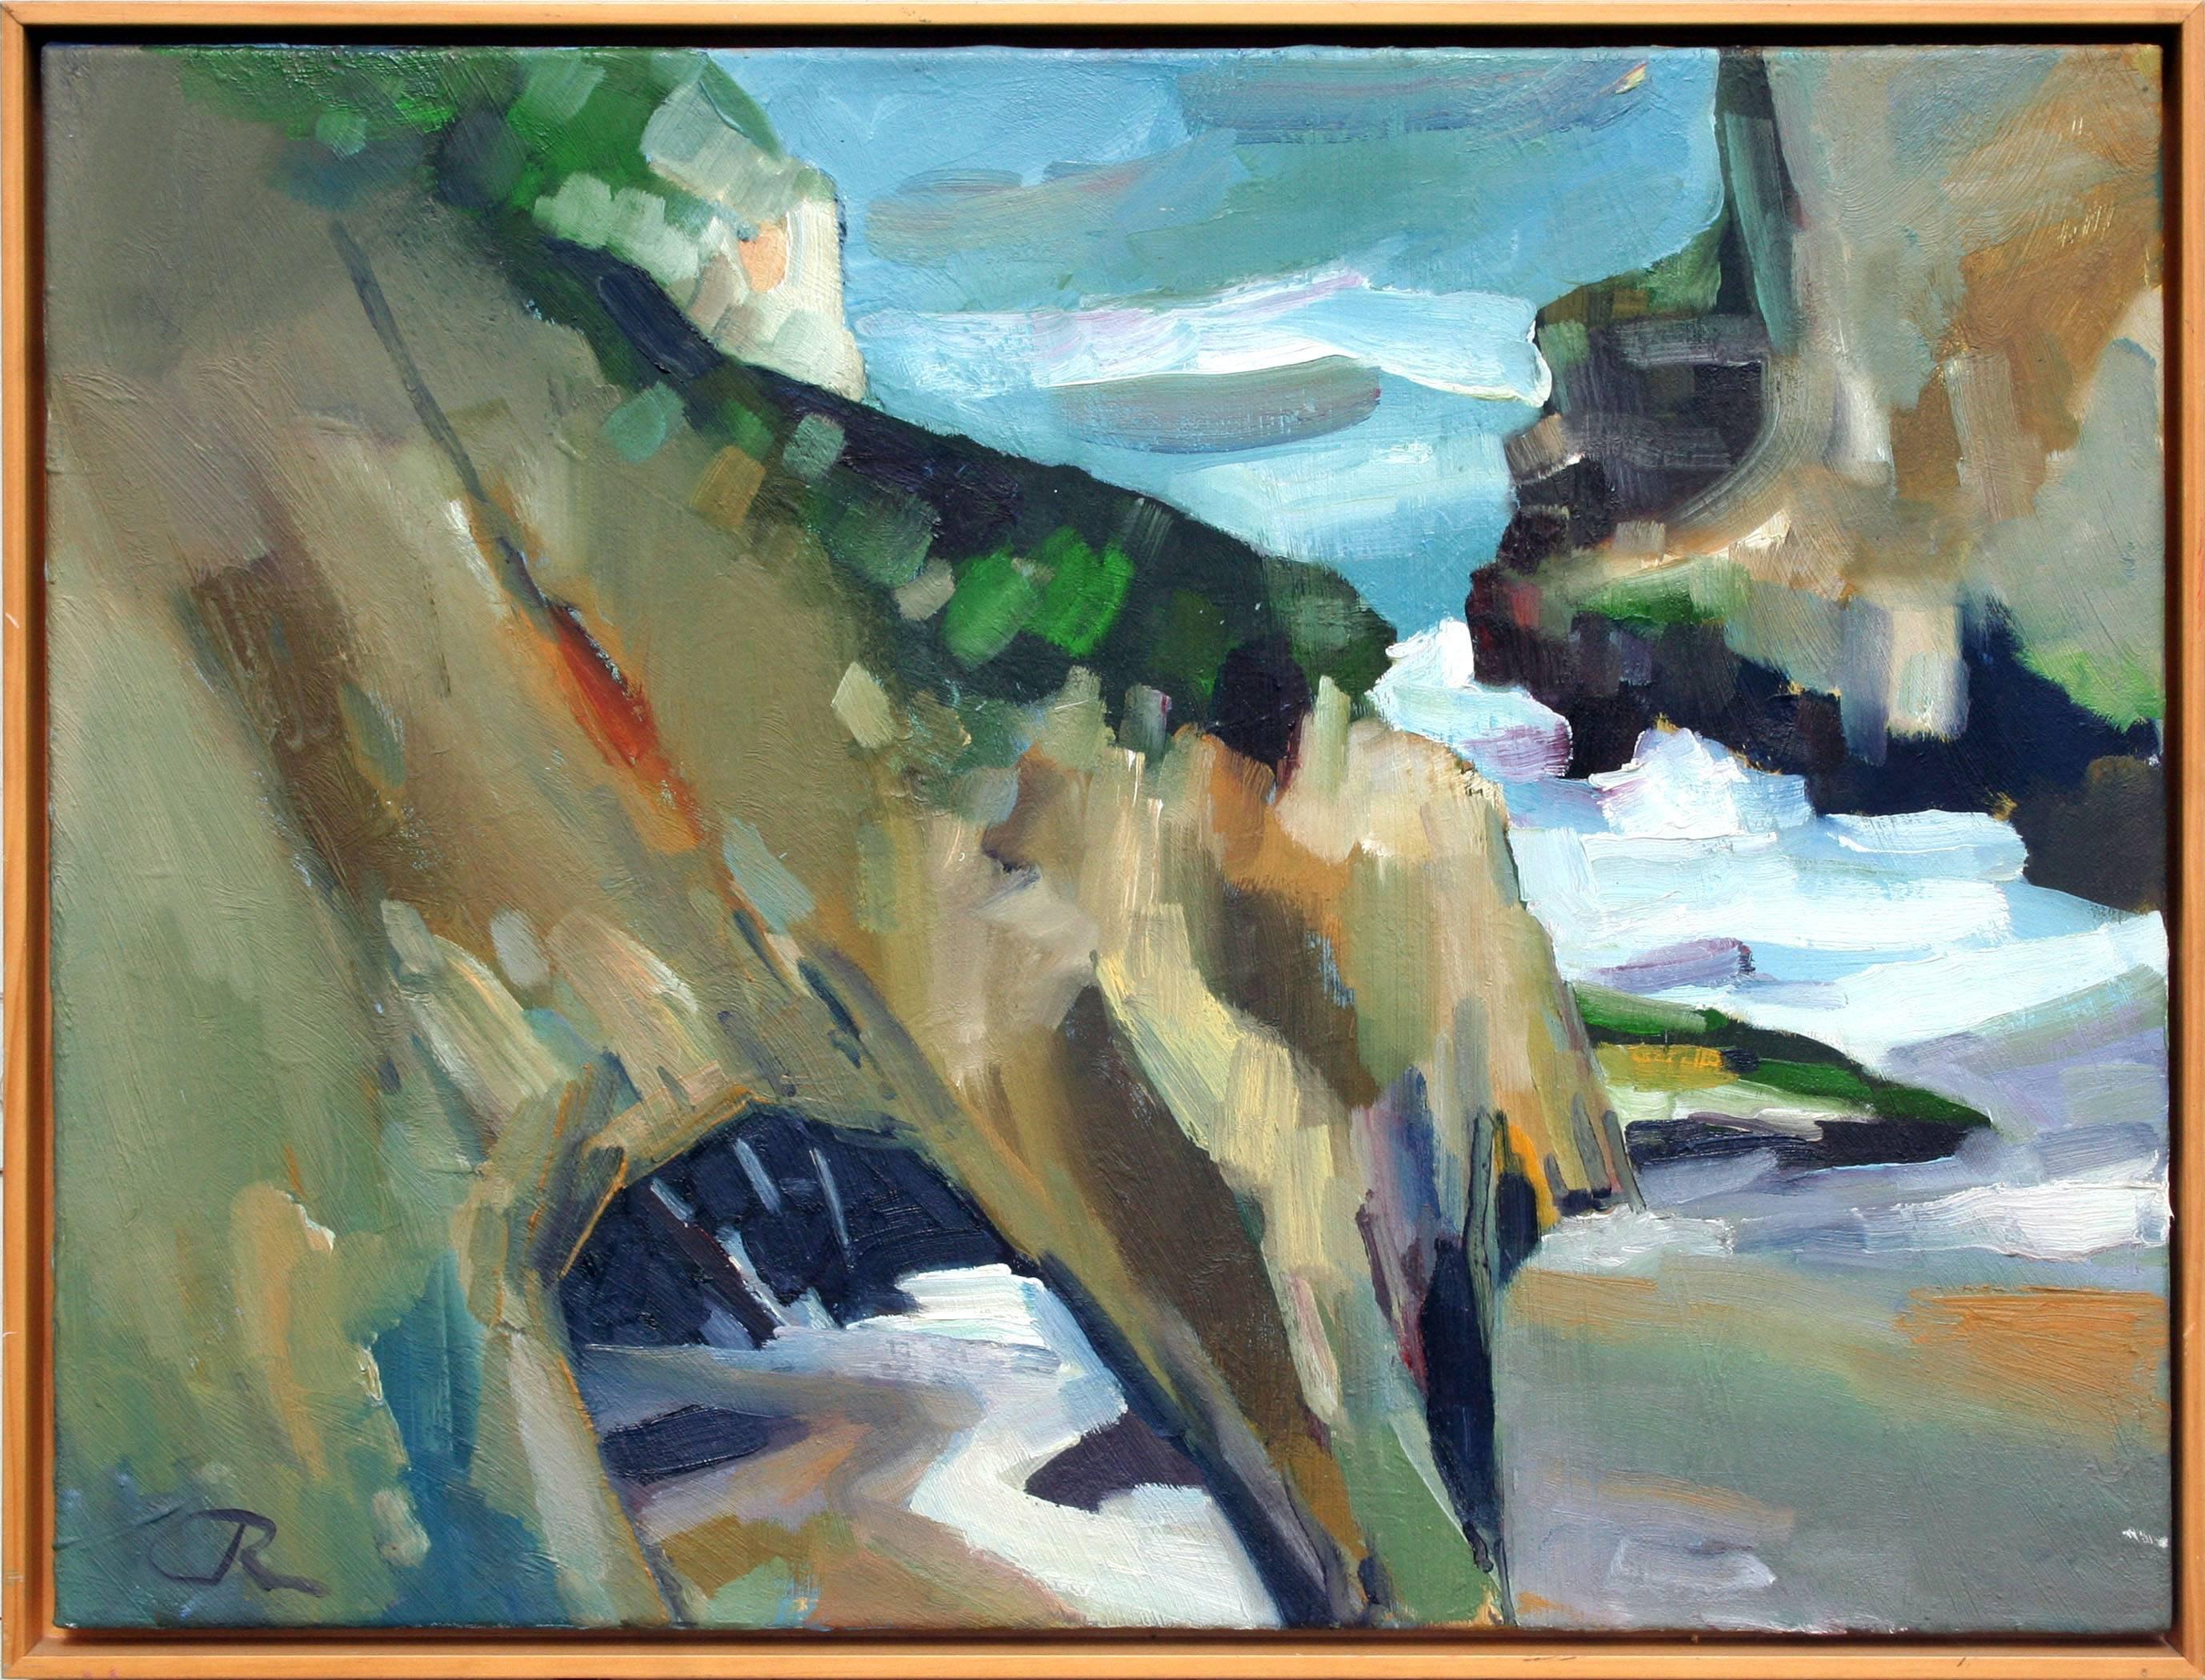 John Crawford Landscape Painting - Abstract Expressionist Sea Cave Landscape